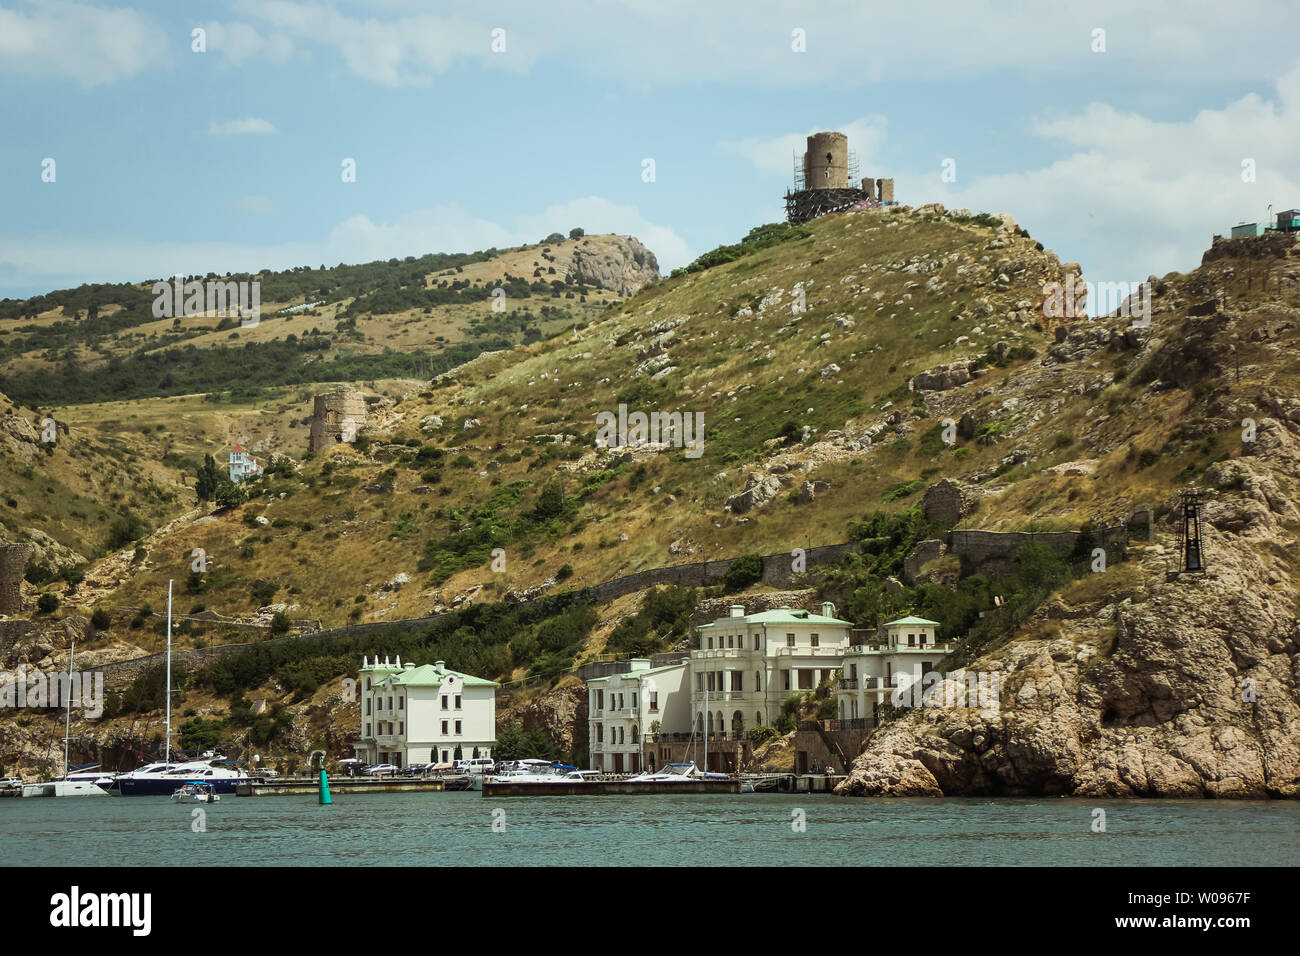 the Bay of Balaklava and the Ruins of Genoese fortress Cembalo. Balaklava, Crimea. beautiful seascape Stock Photo